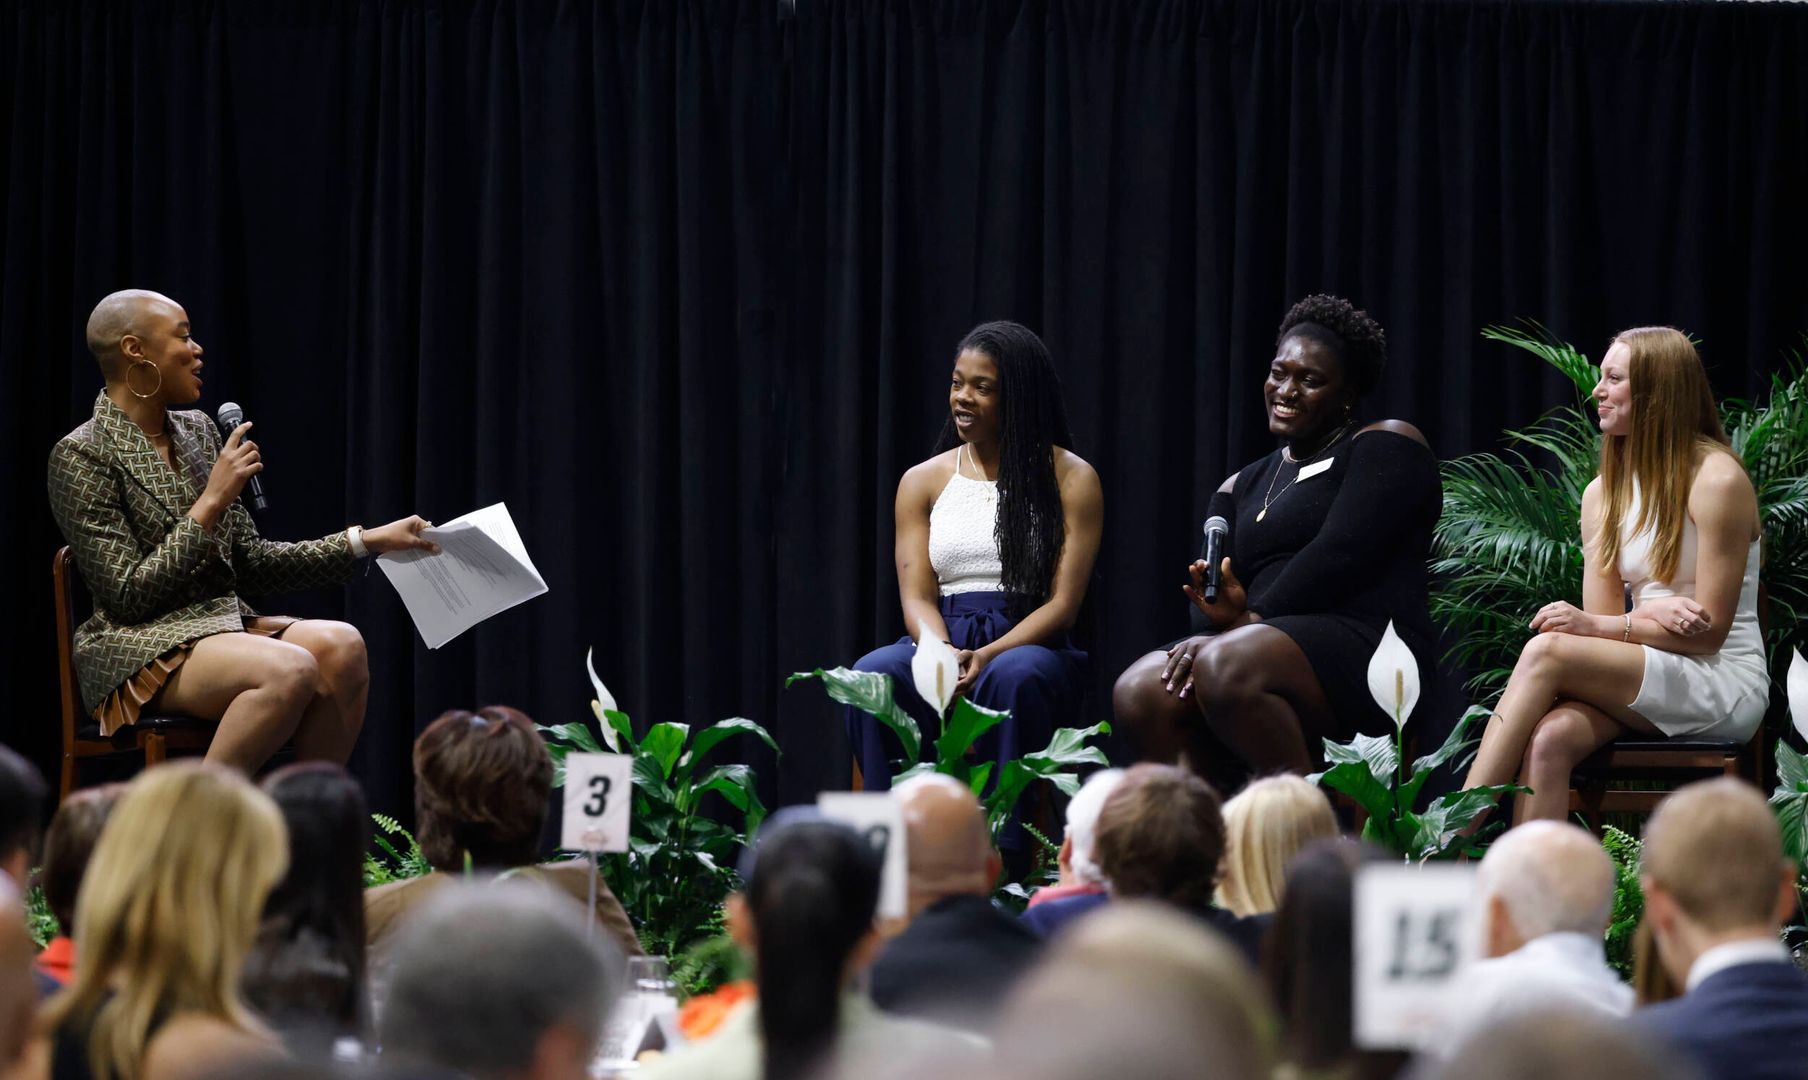 Miami Holds Eighth Annual Celebration of Women's Athletics presented by adidas